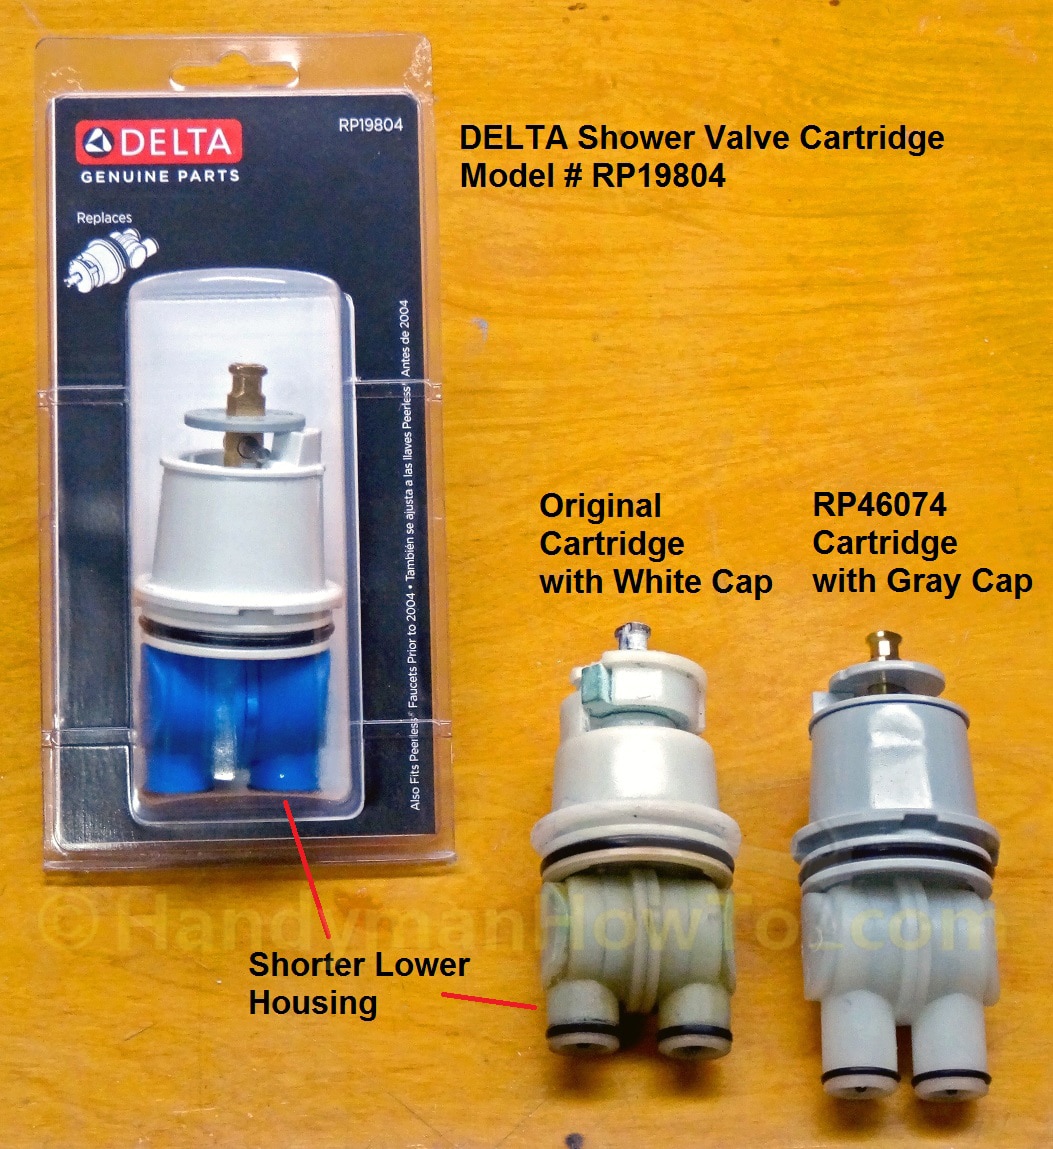 Where can you buy parts to repair a Delta shower faucet?